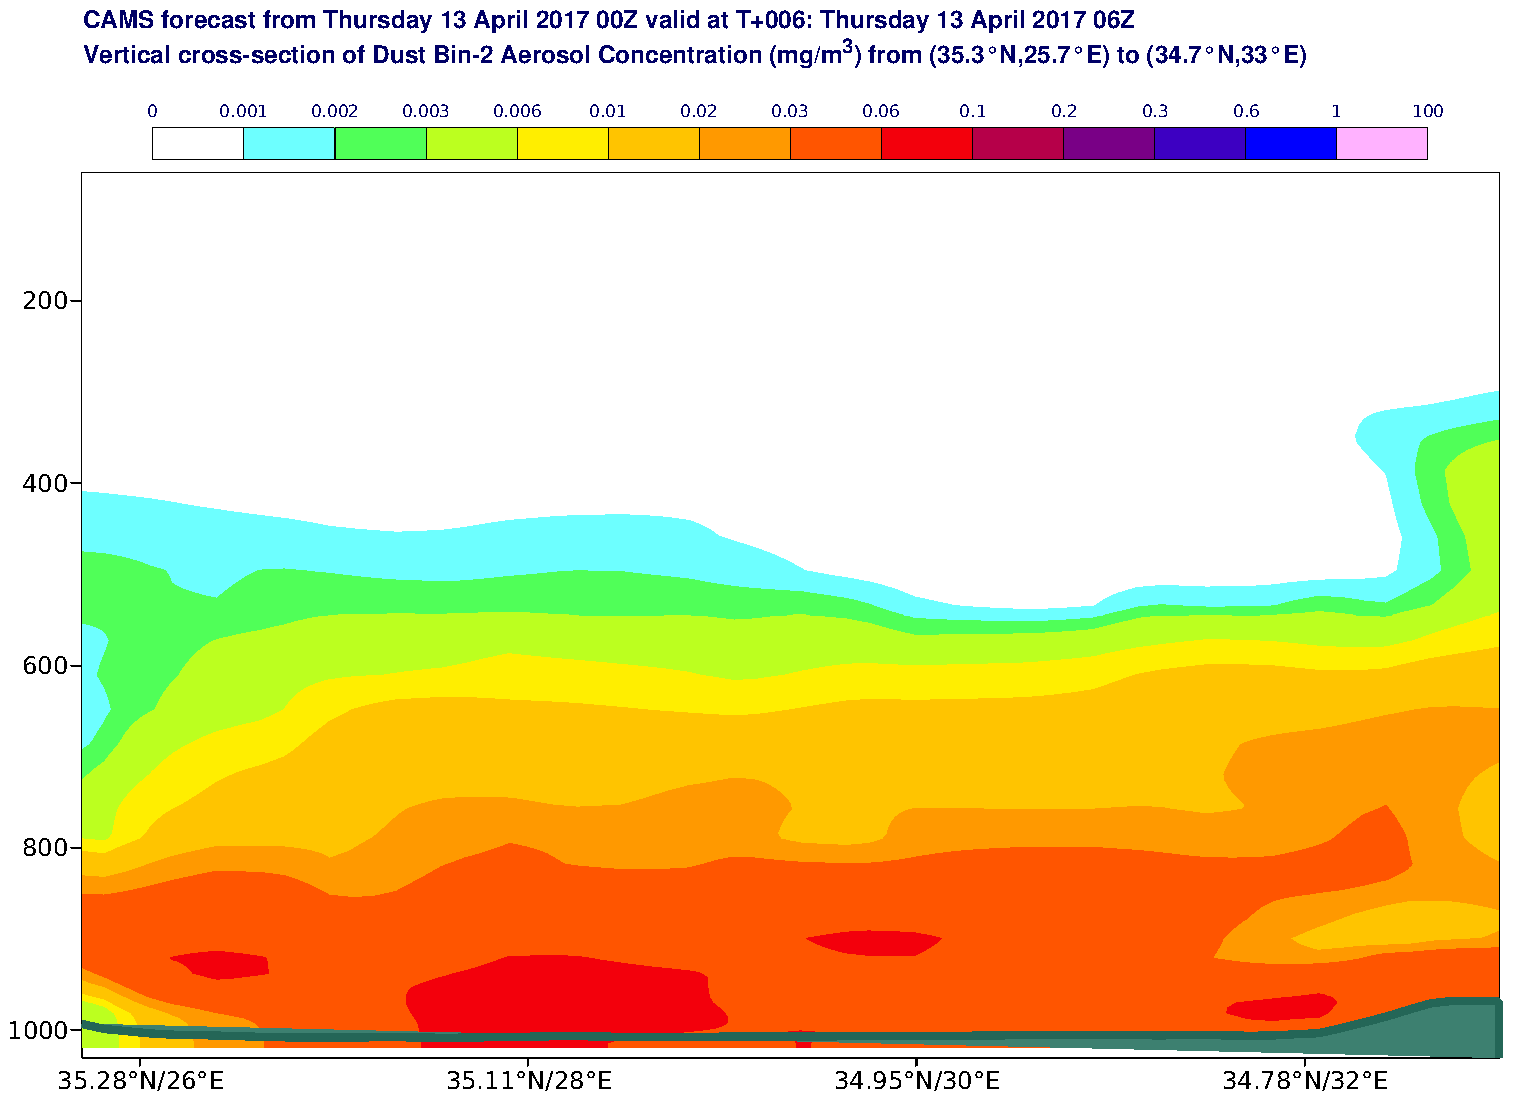 Vertical cross-section of Dust Bin-2 Aerosol Concentration (mg/m3) valid at T6 - 2017-04-13 06:00